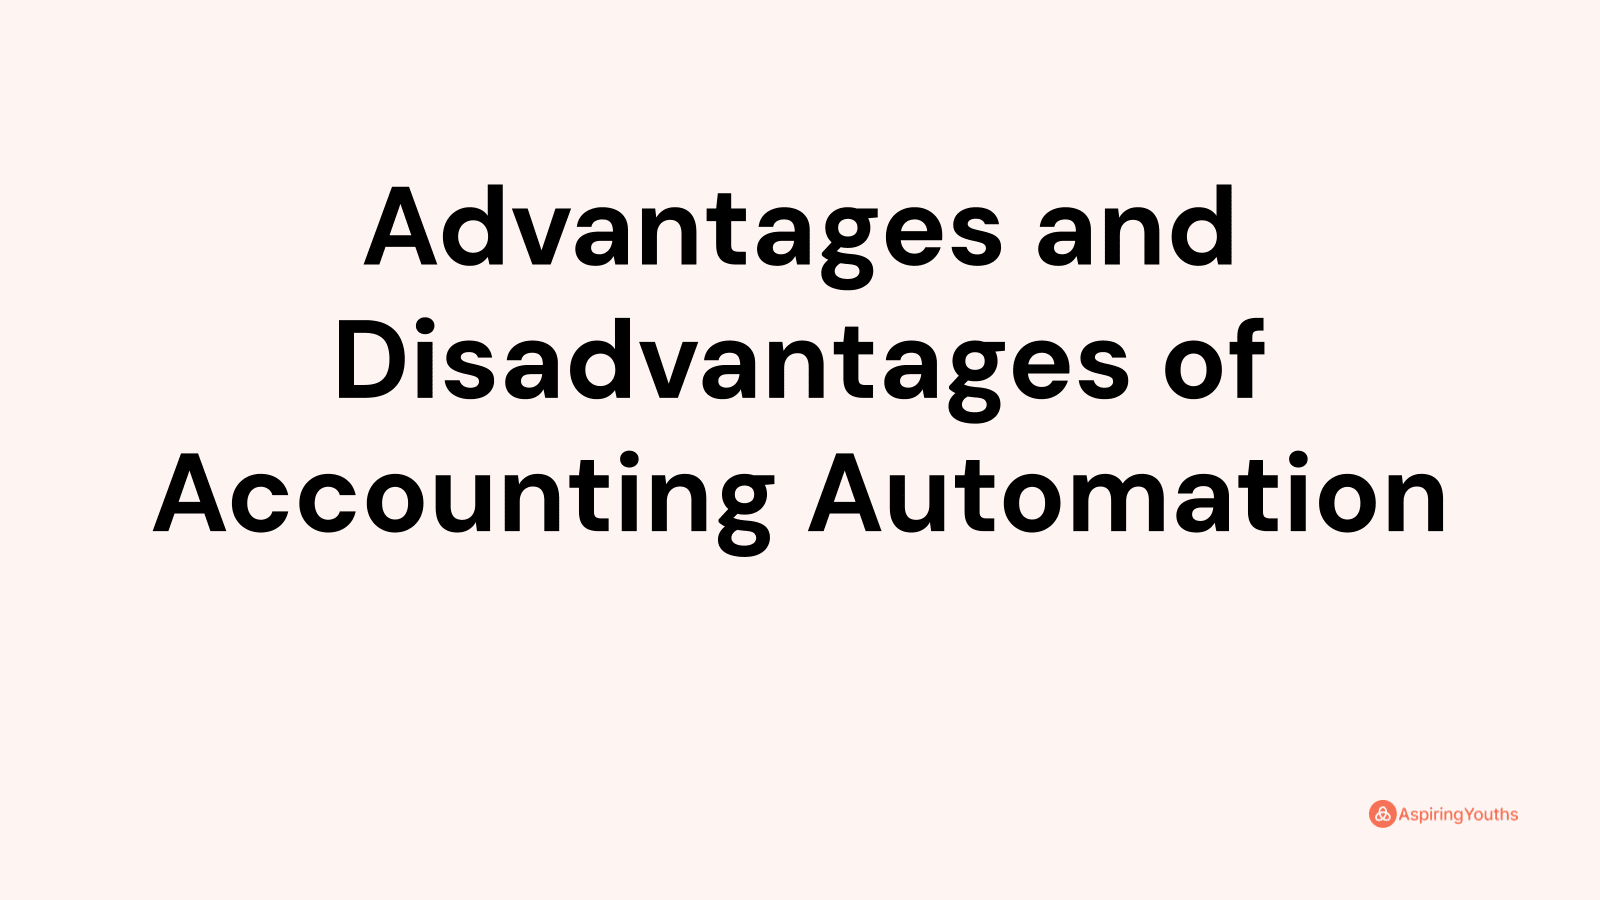 Advantages and disadvantages of Accounting Automation